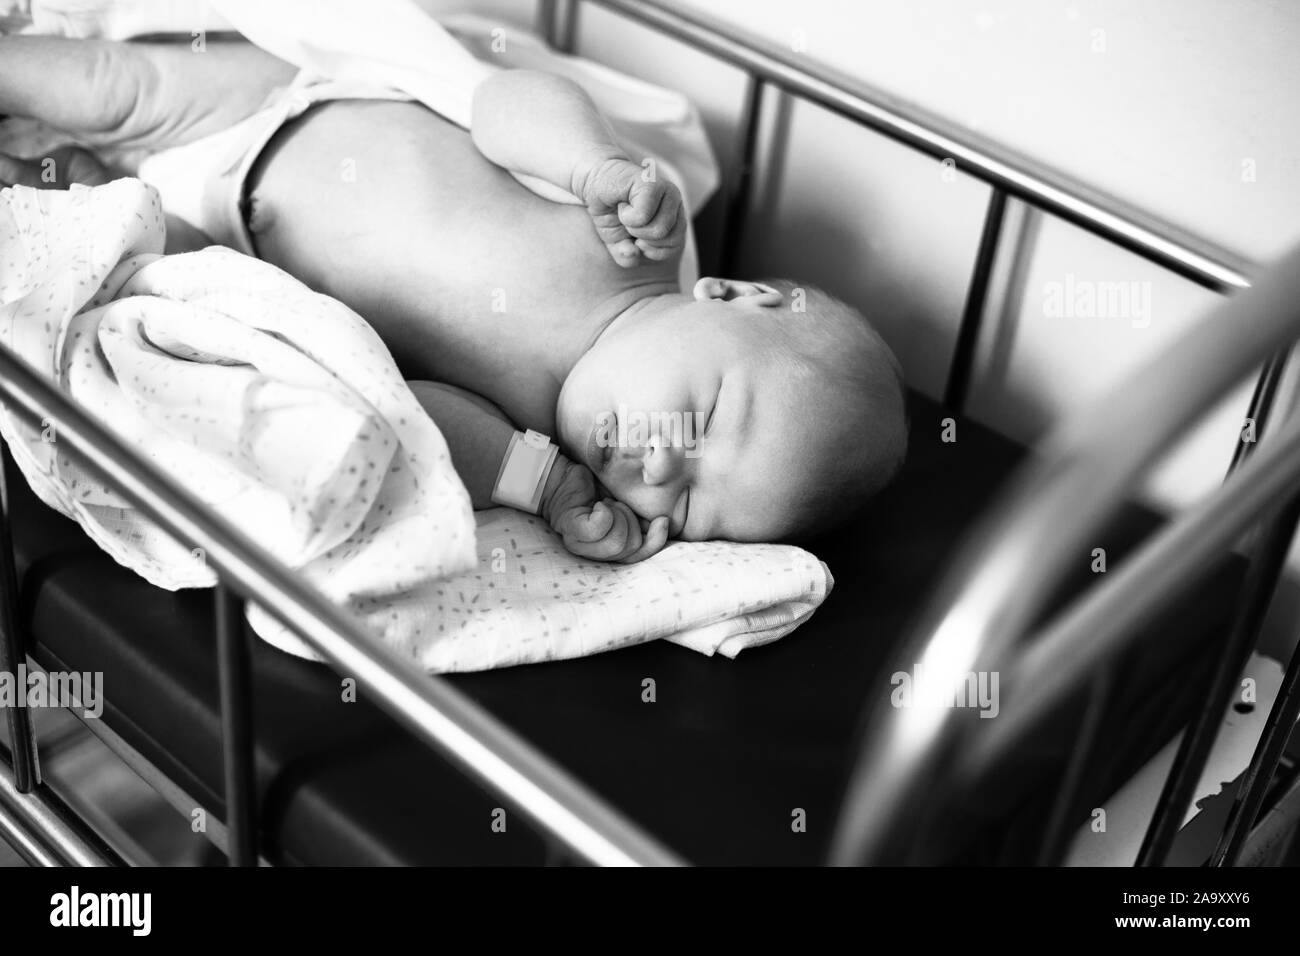 Sleeping newborn resting in a hospital bed in the maternity ward of the hospital. Stock Photo